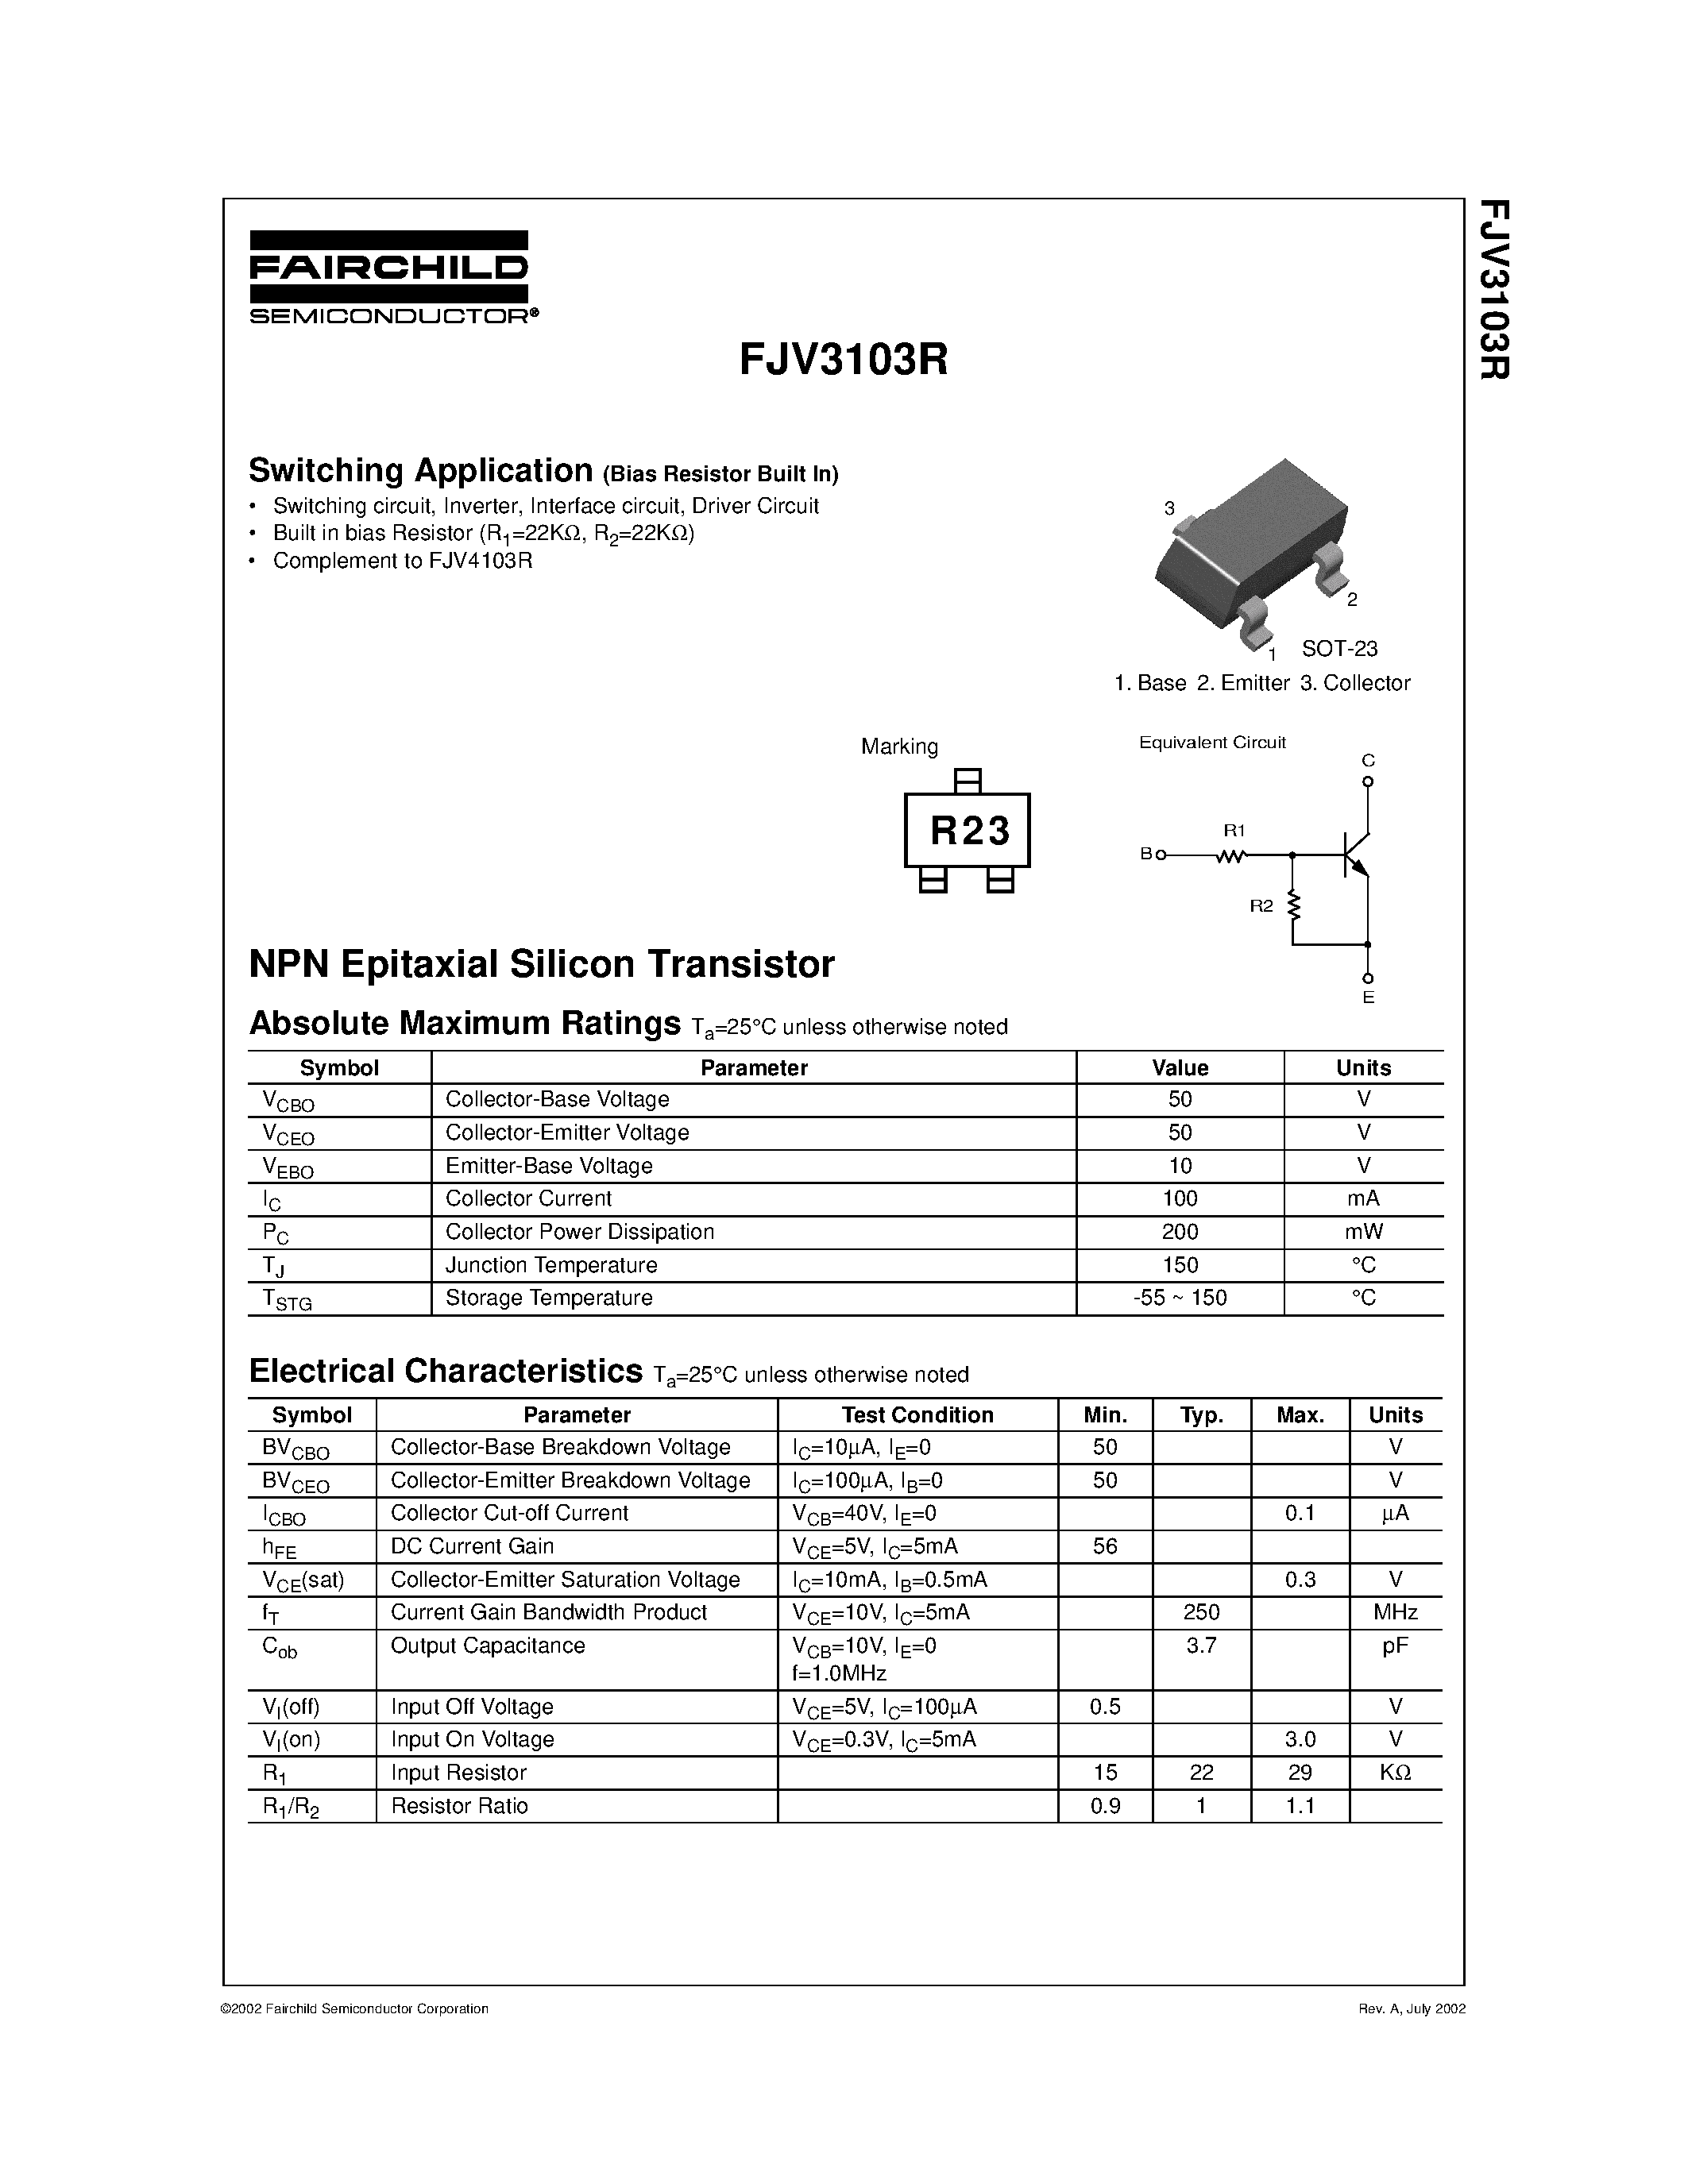 Datasheet FJV3103R - NPN Epitaxial Silicon Transistor page 1